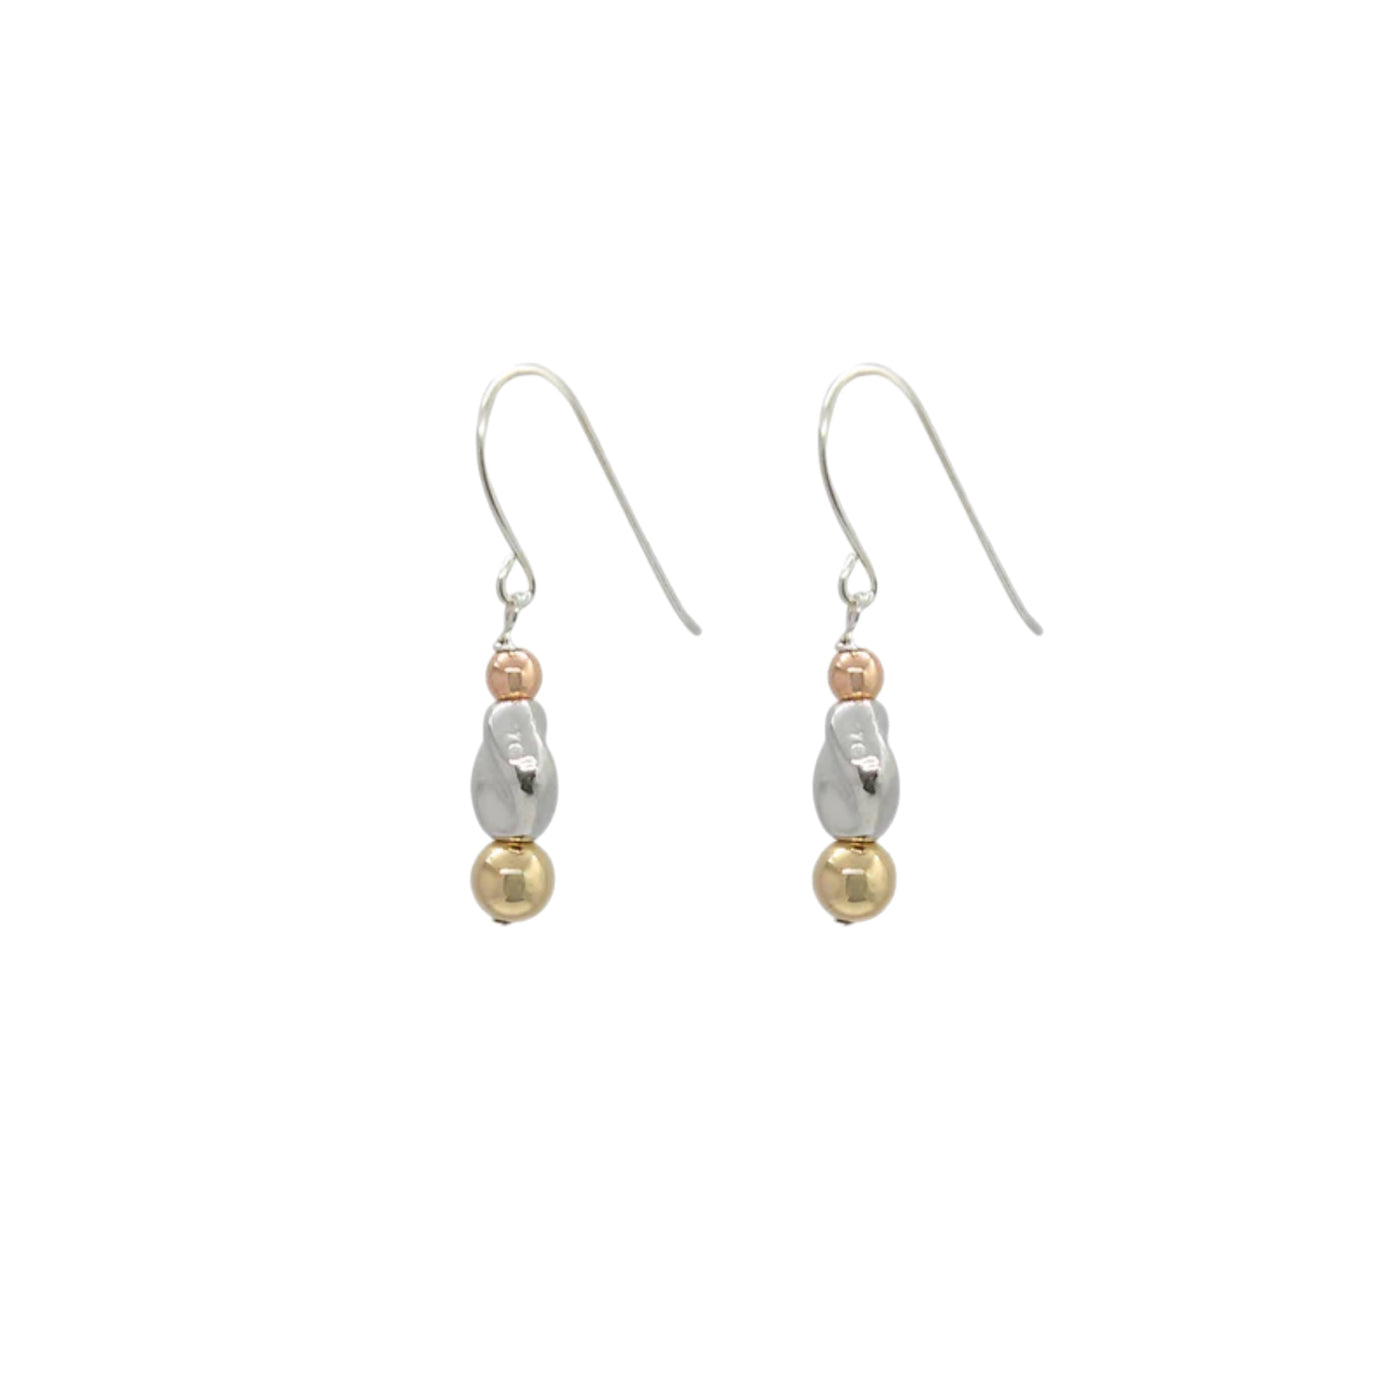 Sterling silver, rose and yellow gold filled handcrafted Israeli drop earrings 